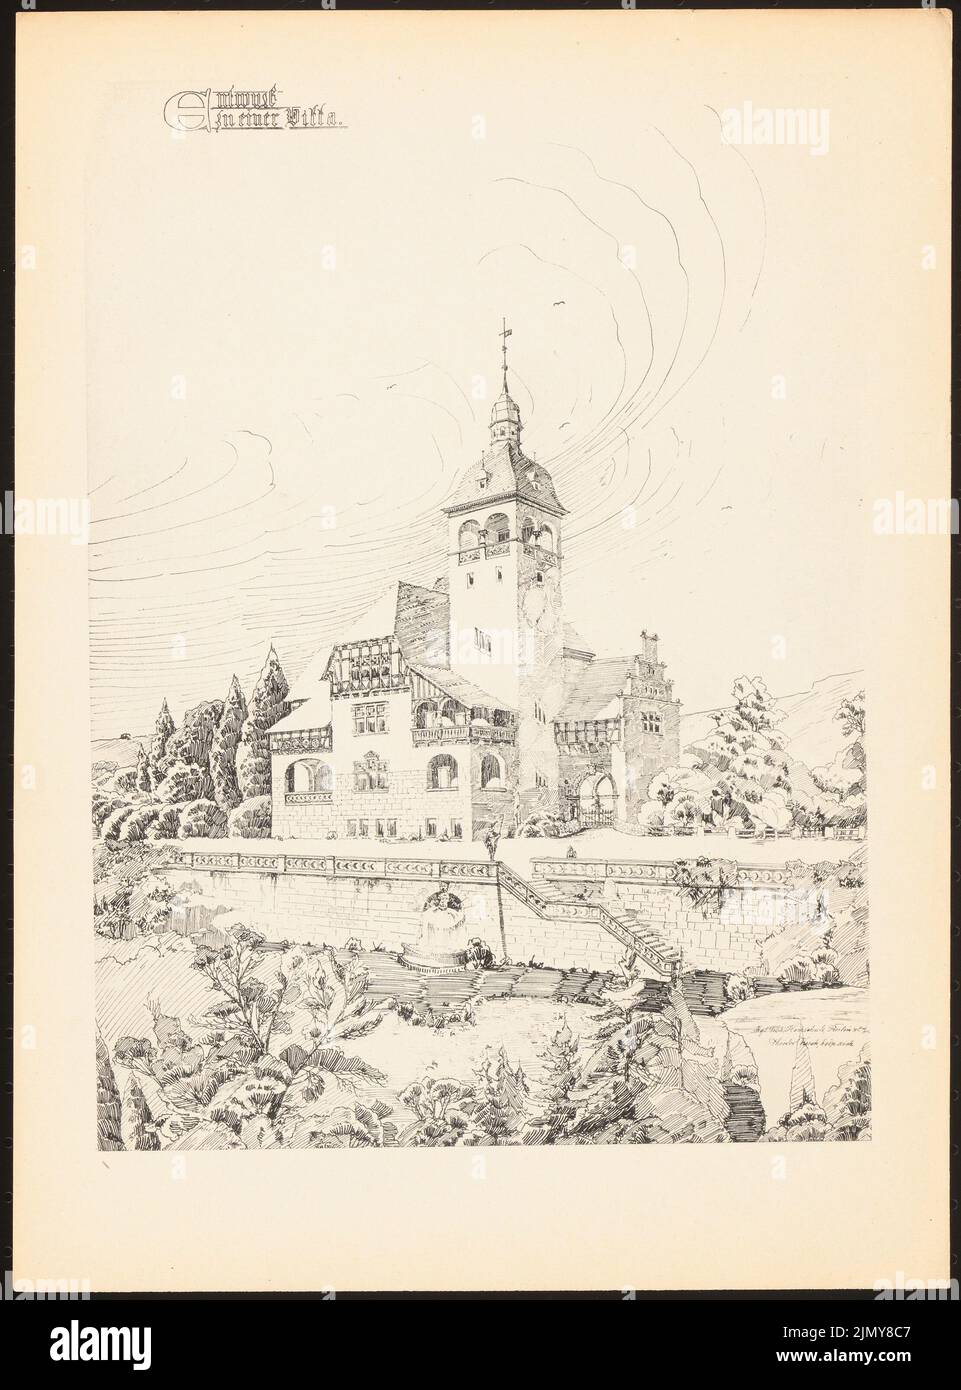 Kasch Theodor, Villa. (From: Prints of seminar works by the Royal Technical University of Berlin, Vol. II) (1901/1902): Perspective view. Pressure on paper, 33.2 x 24.6 cm (including scan edges) Stock Photo